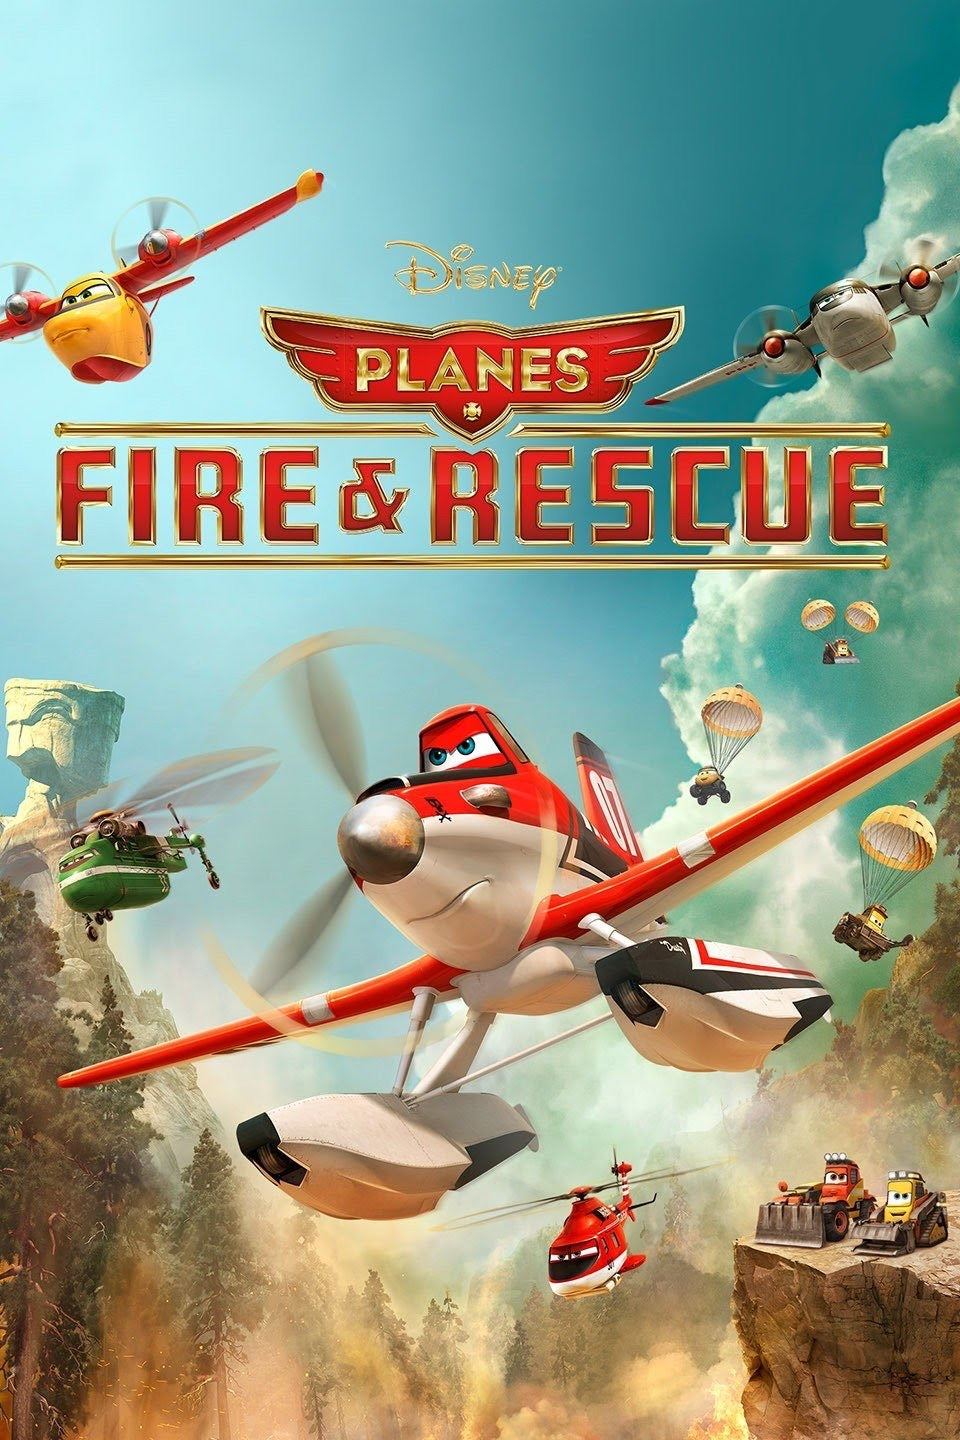 Planes: Fire & Rescue (2014) Vudu or Movies Anywhere HD redemption only